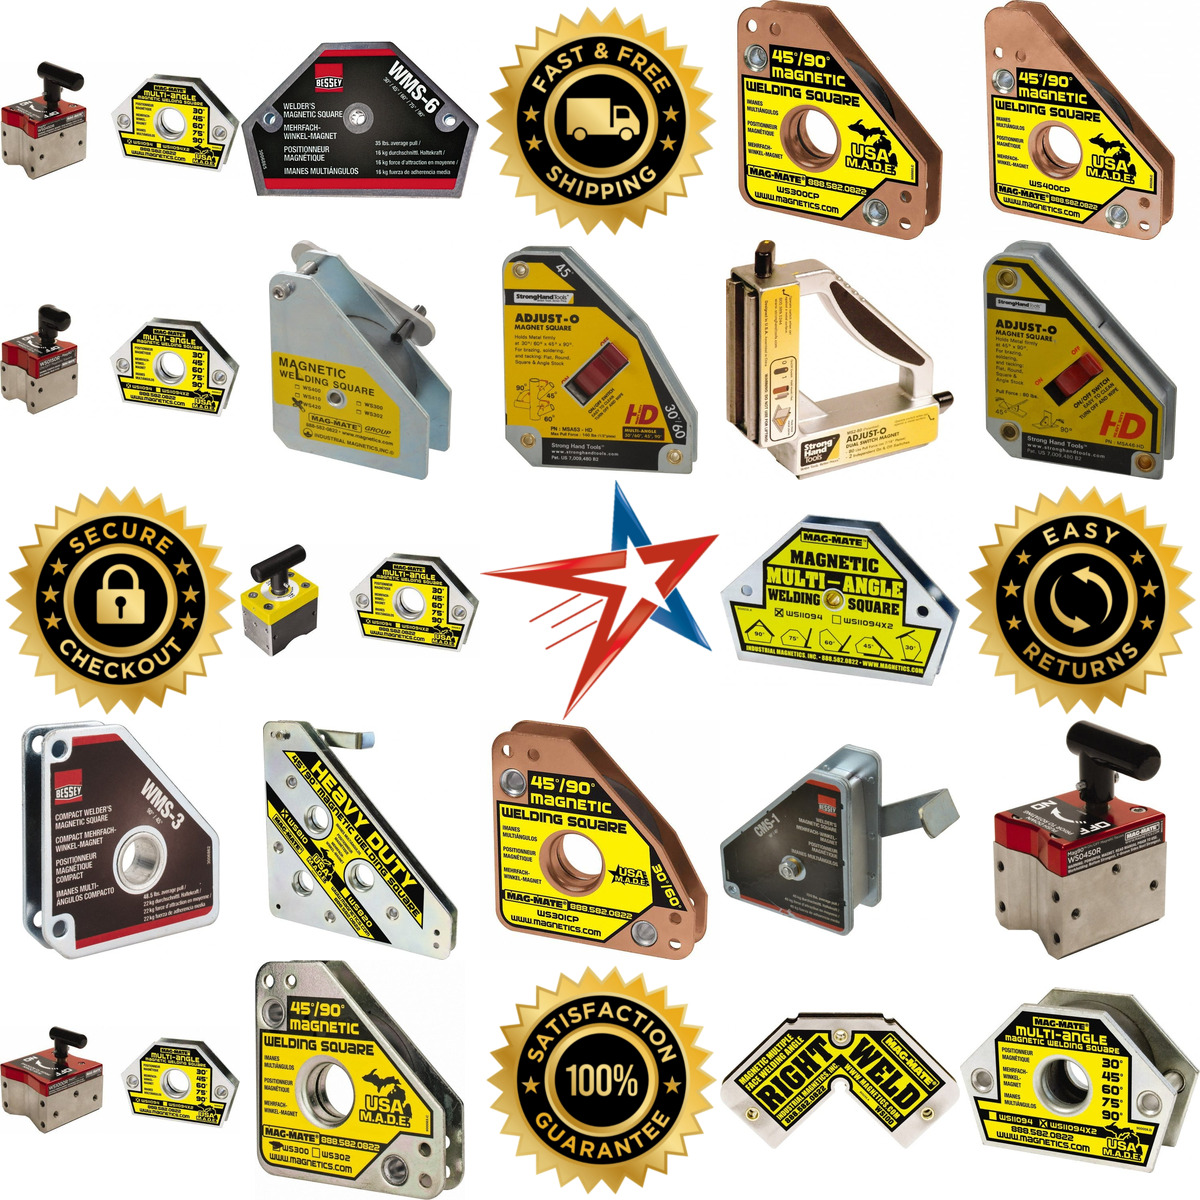 A selection of Magnetic Welding and Fabrication Squares products on GoVets